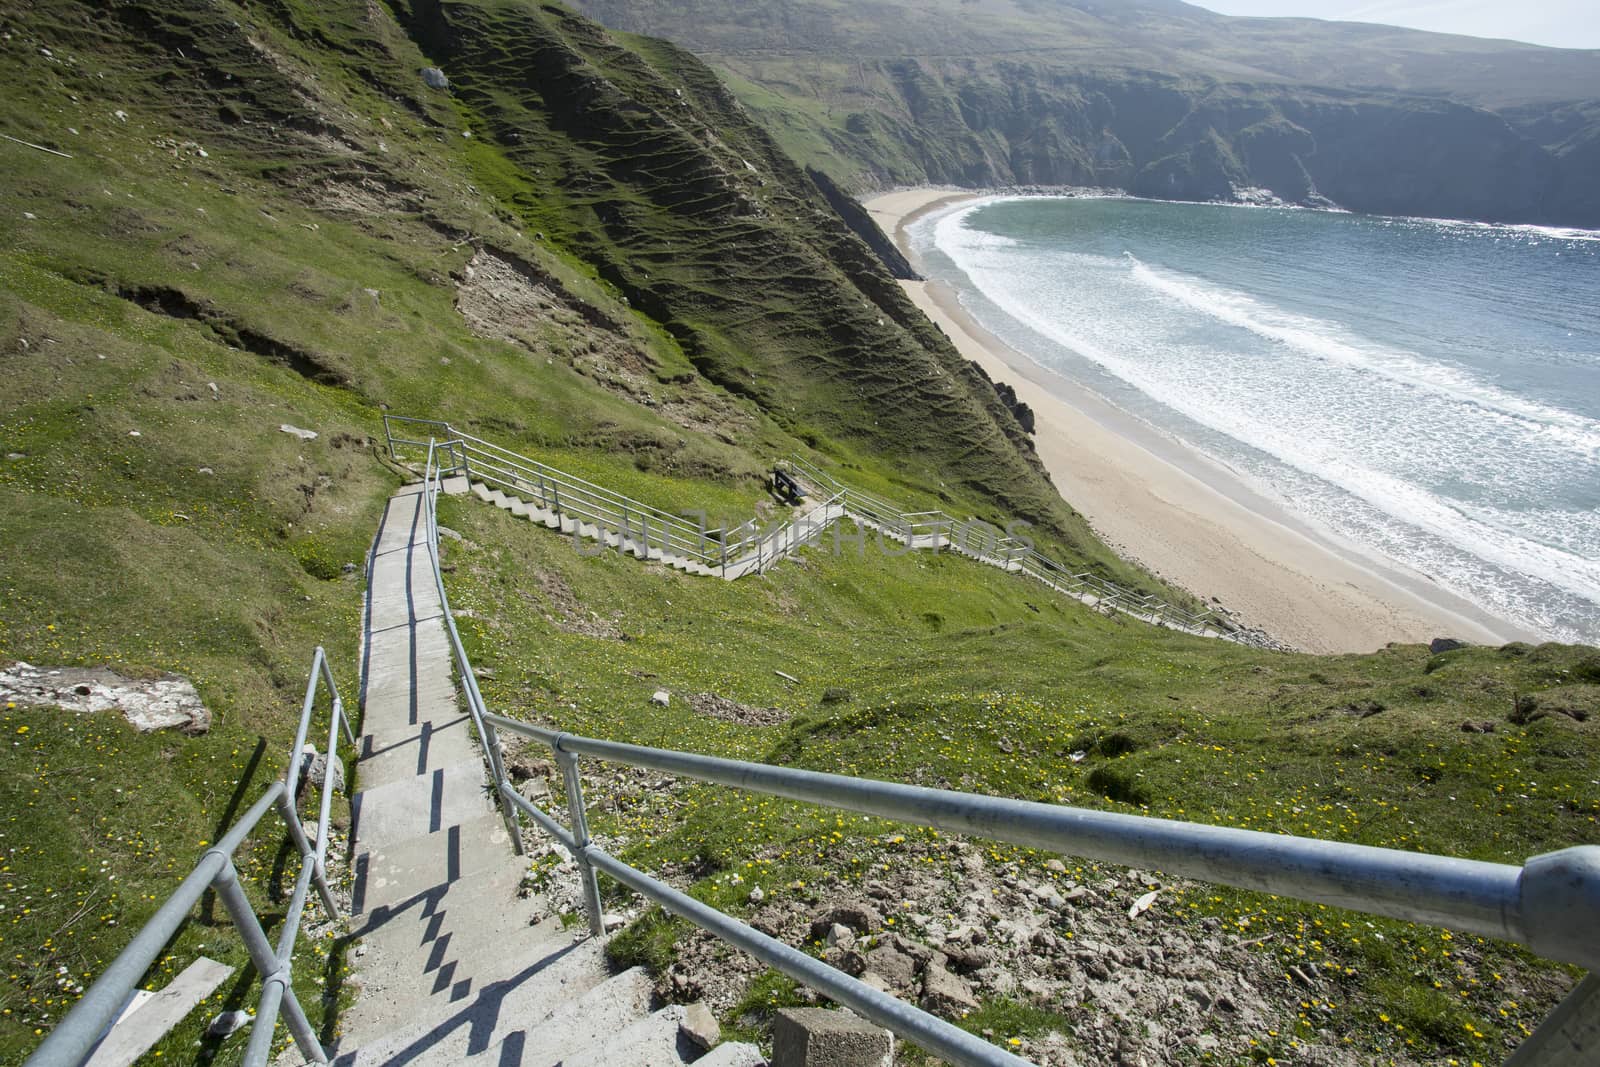 The steps down to the Silver Strand, a secluded beach in Co. Donegal in the Northwest of Ireland